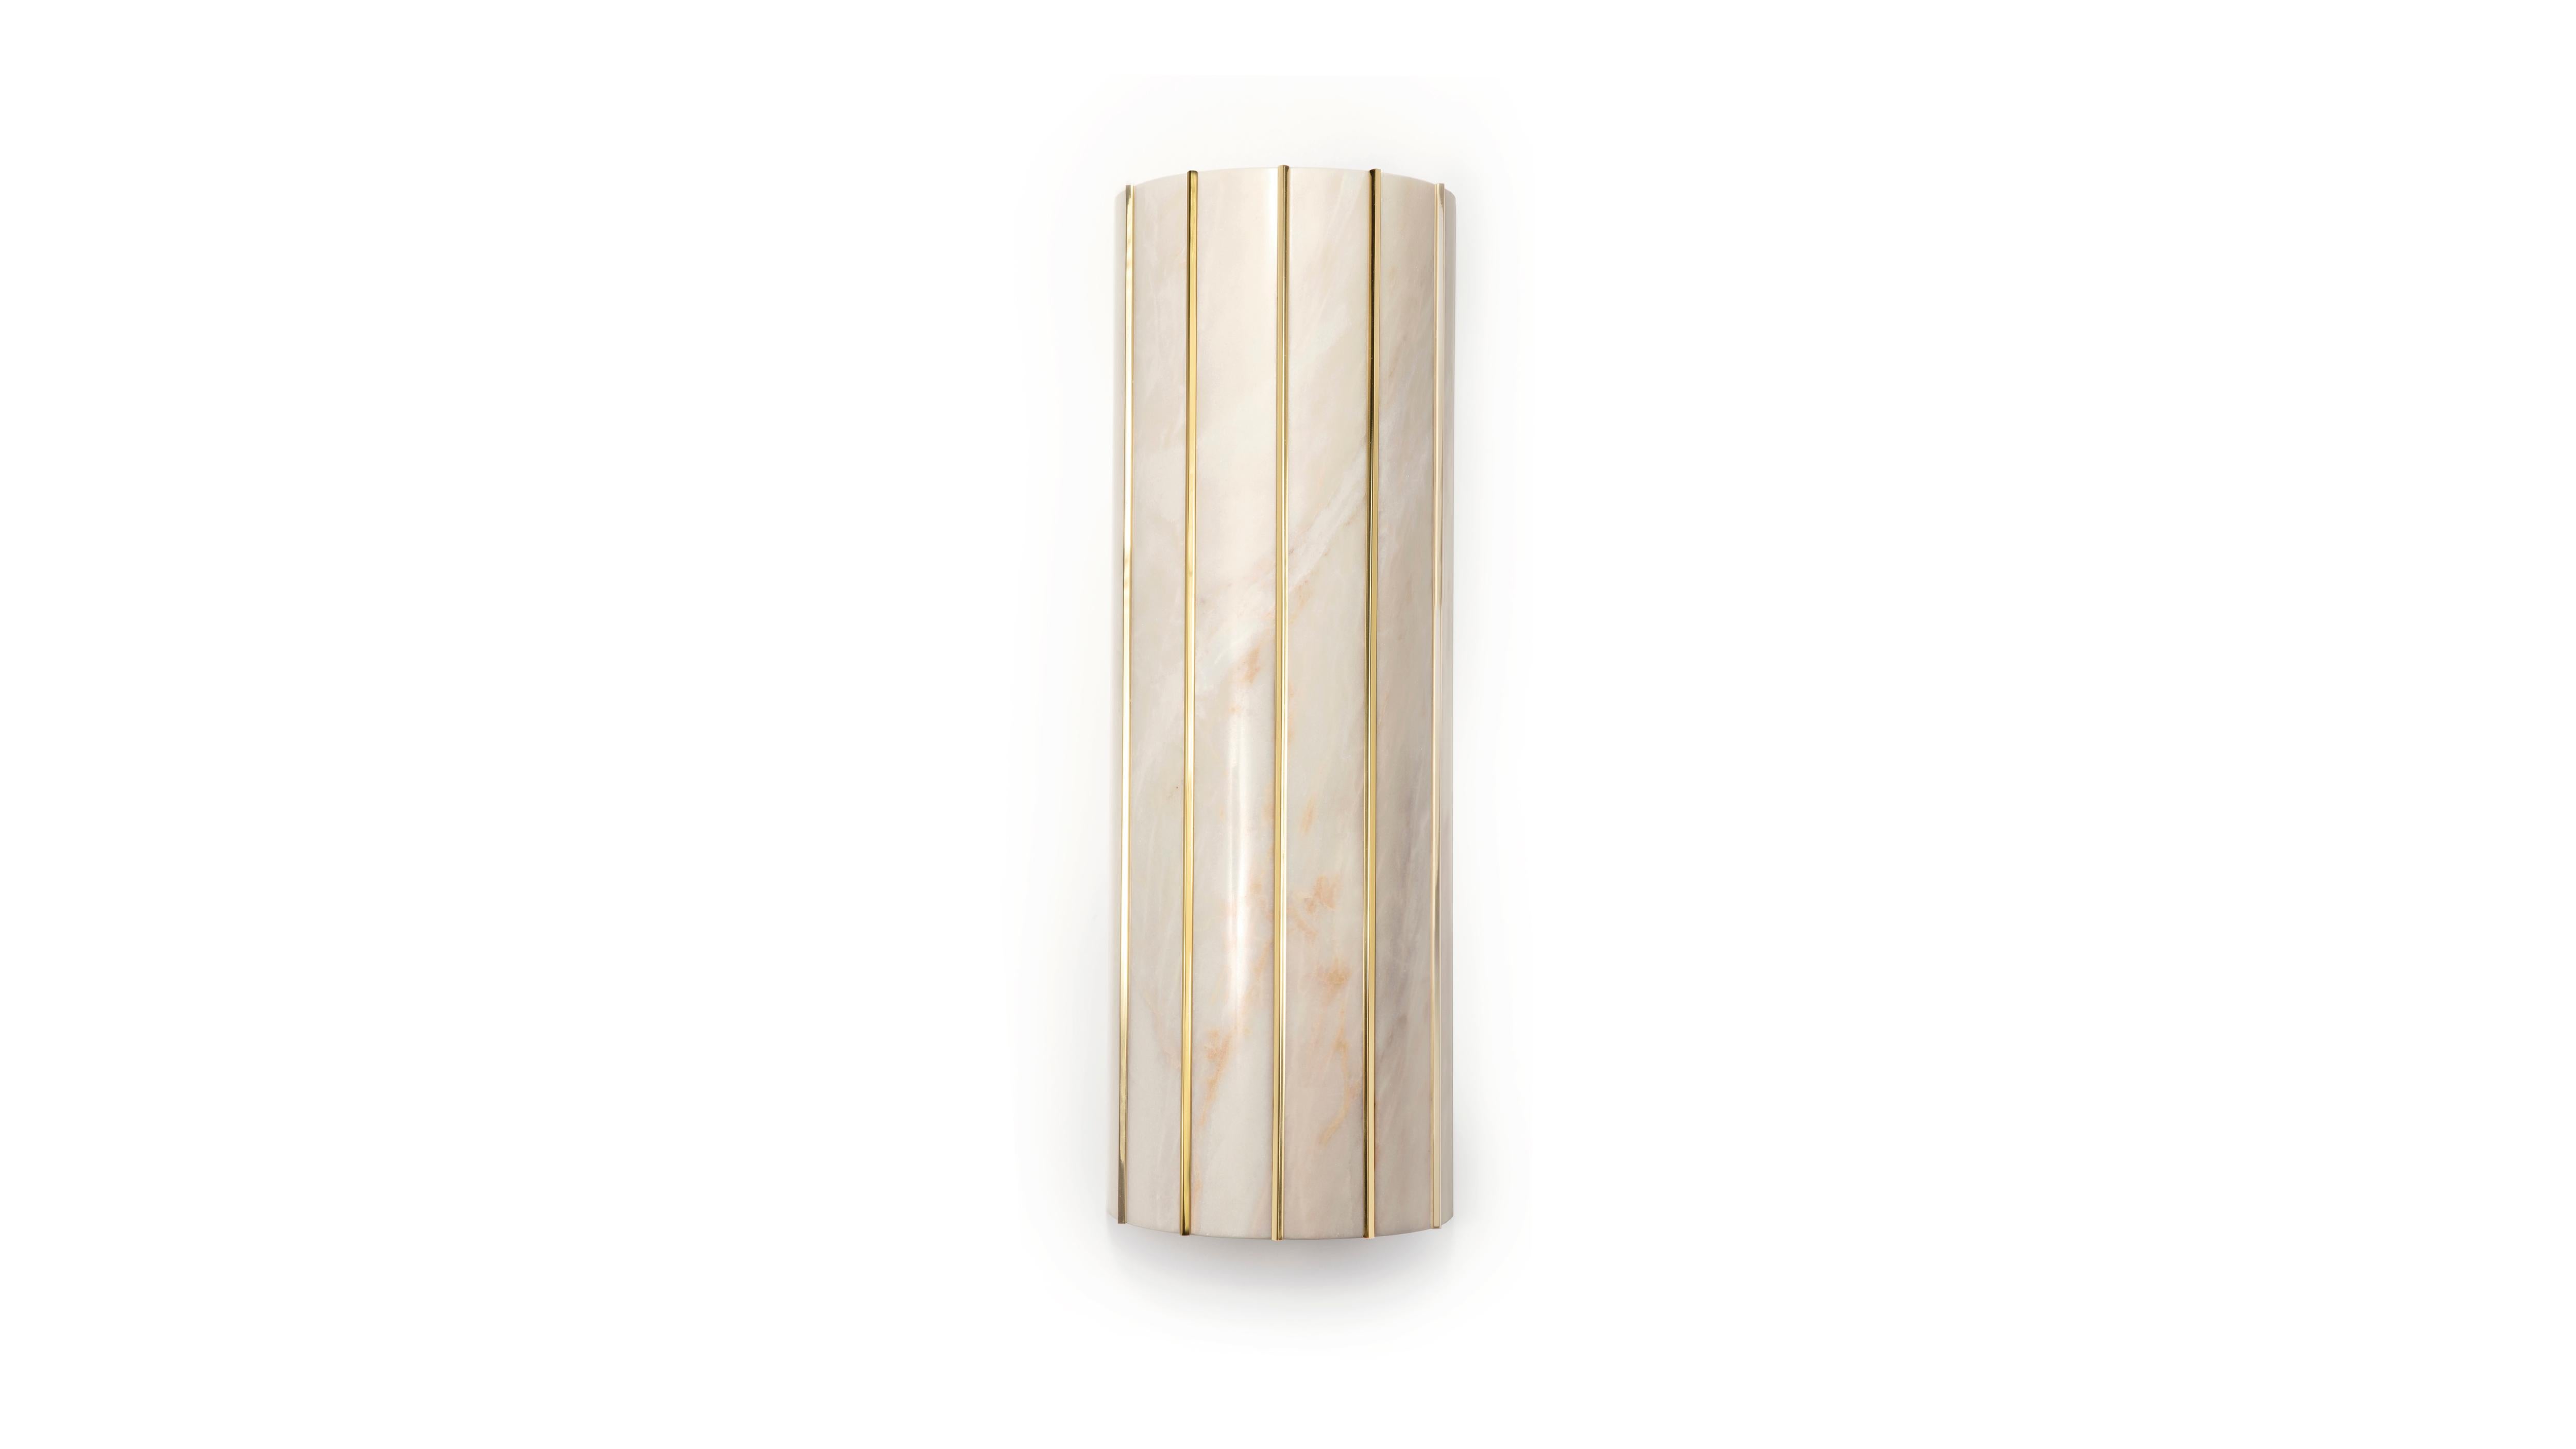 The marble alternates with polished brass in a cylindrical form. Handcrafted. Various marble and brass finishes are available.